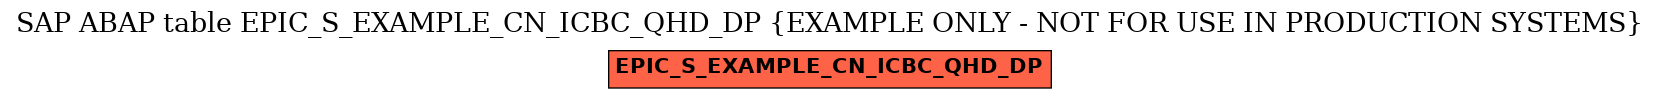 E-R Diagram for table EPIC_S_EXAMPLE_CN_ICBC_QHD_DP (EXAMPLE ONLY - NOT FOR USE IN PRODUCTION SYSTEMS)